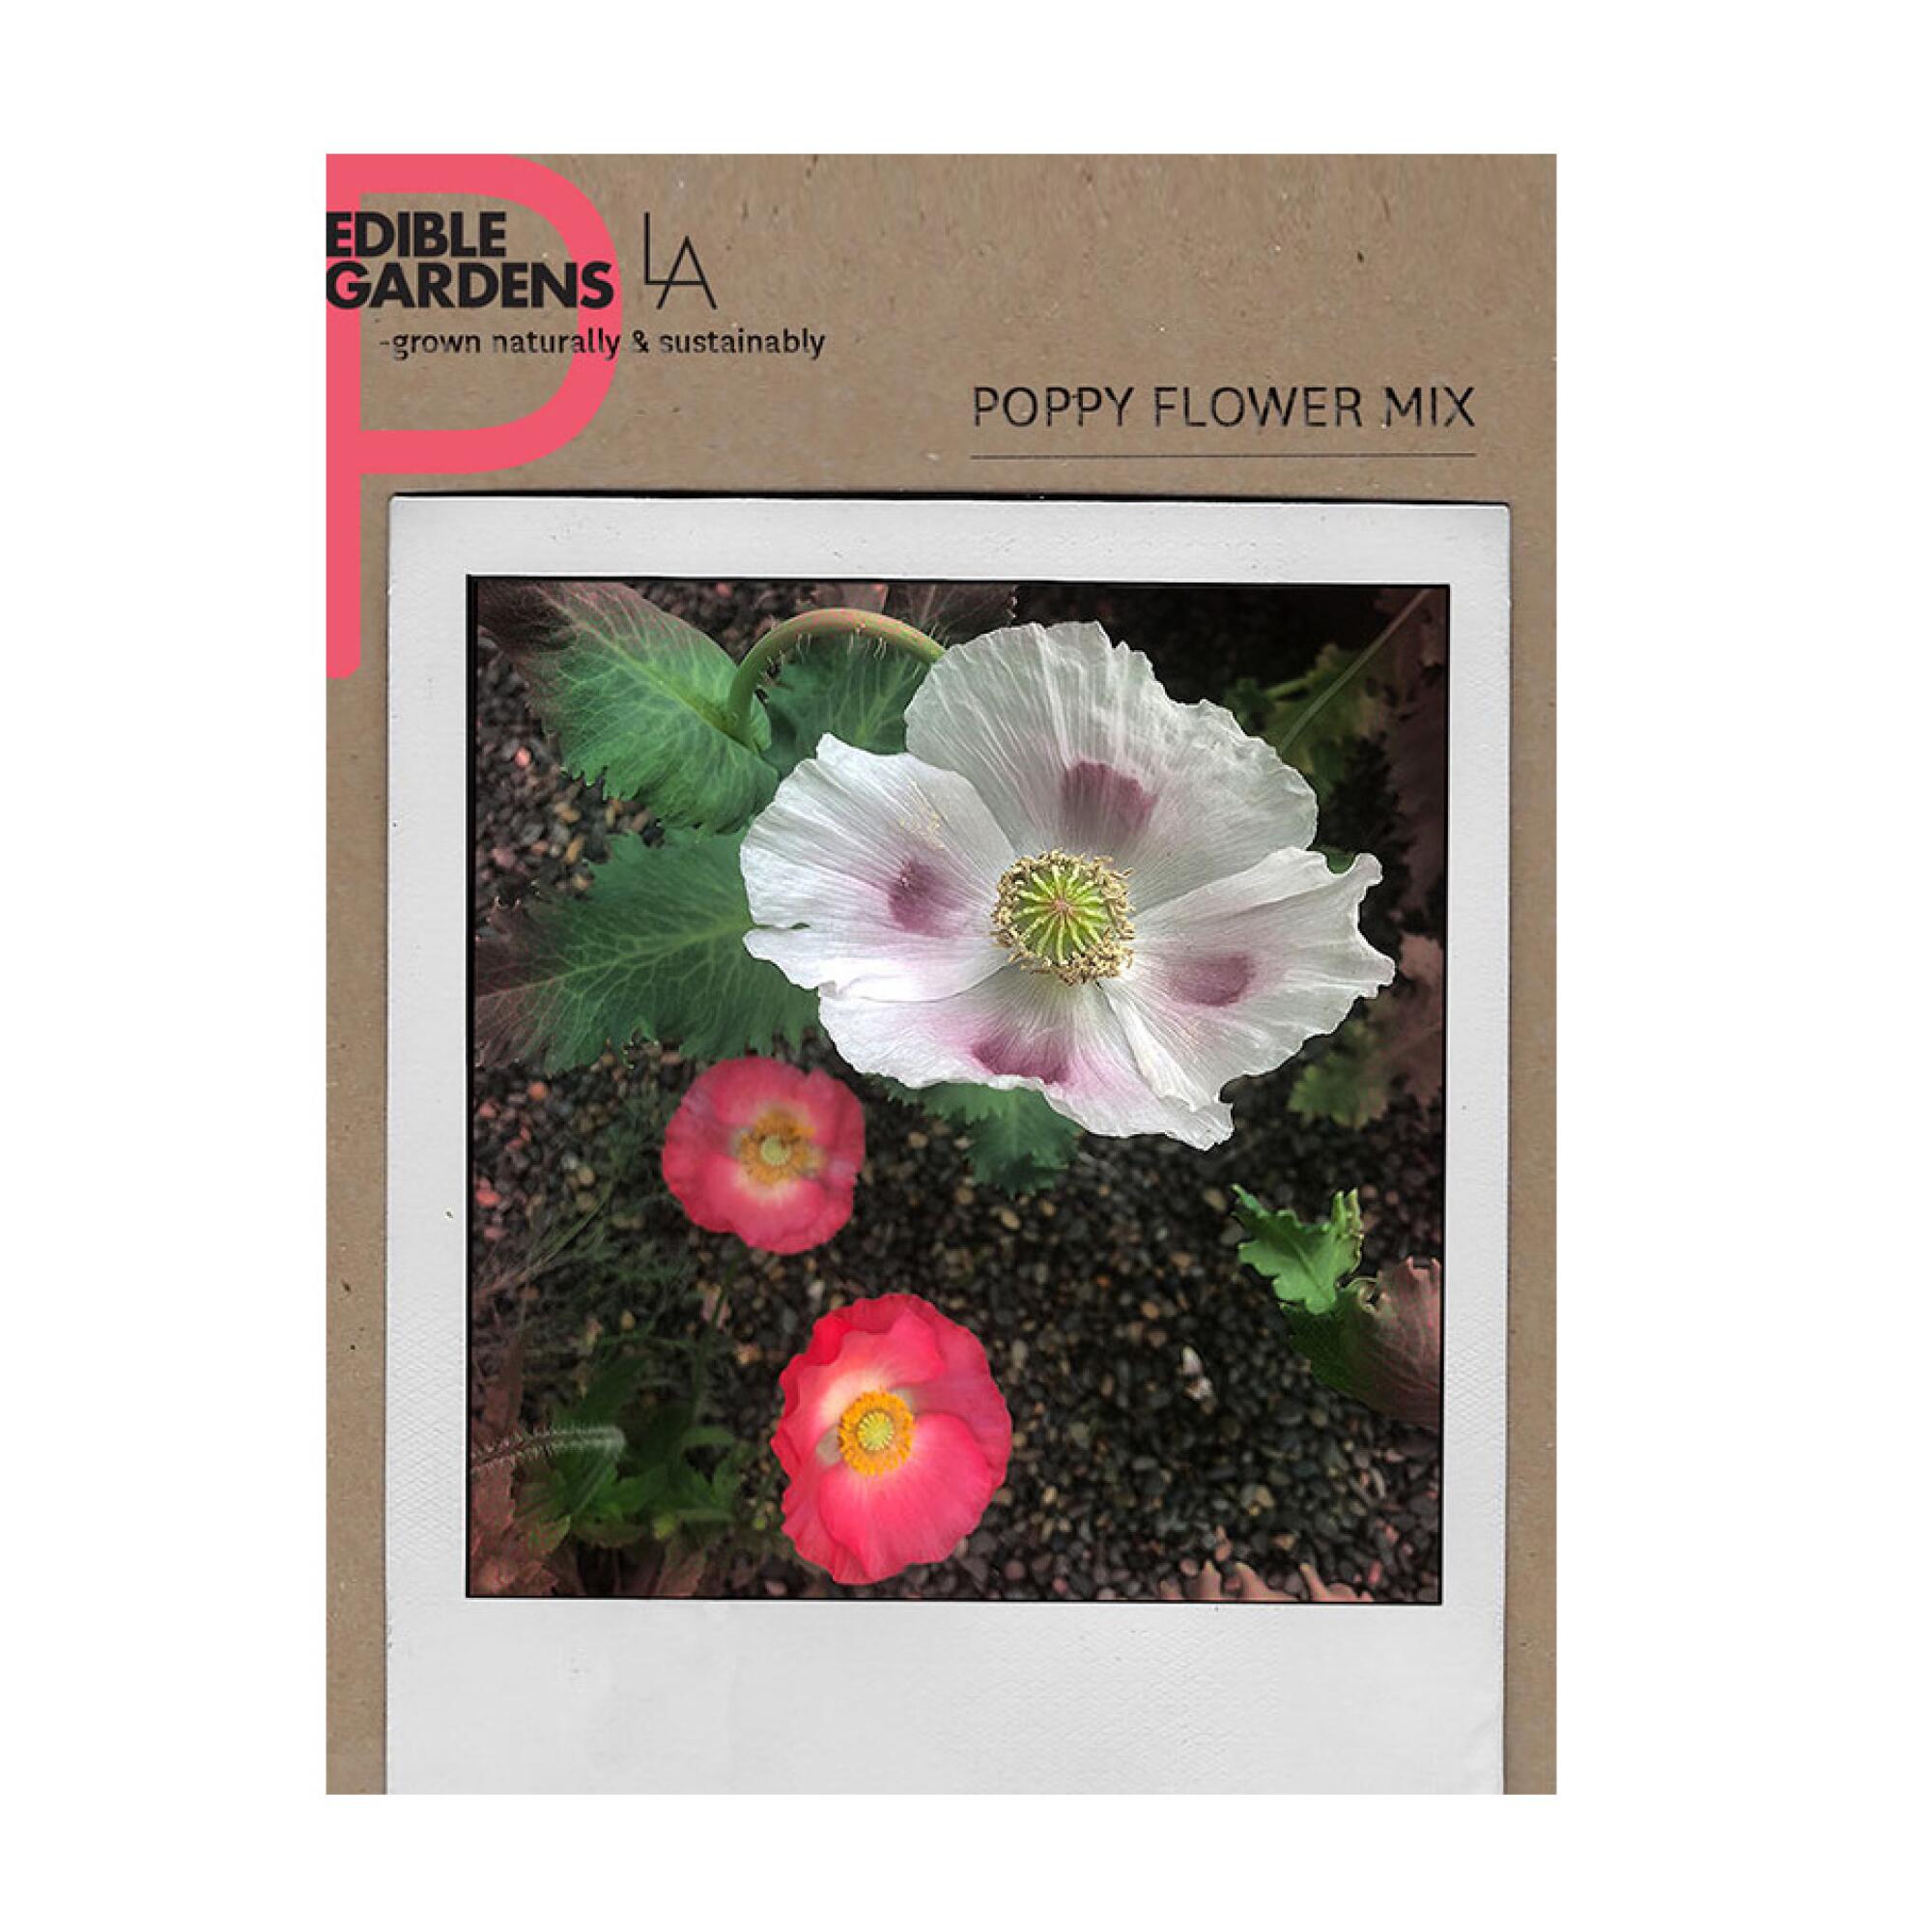 A packet of poppy seeds for planting.